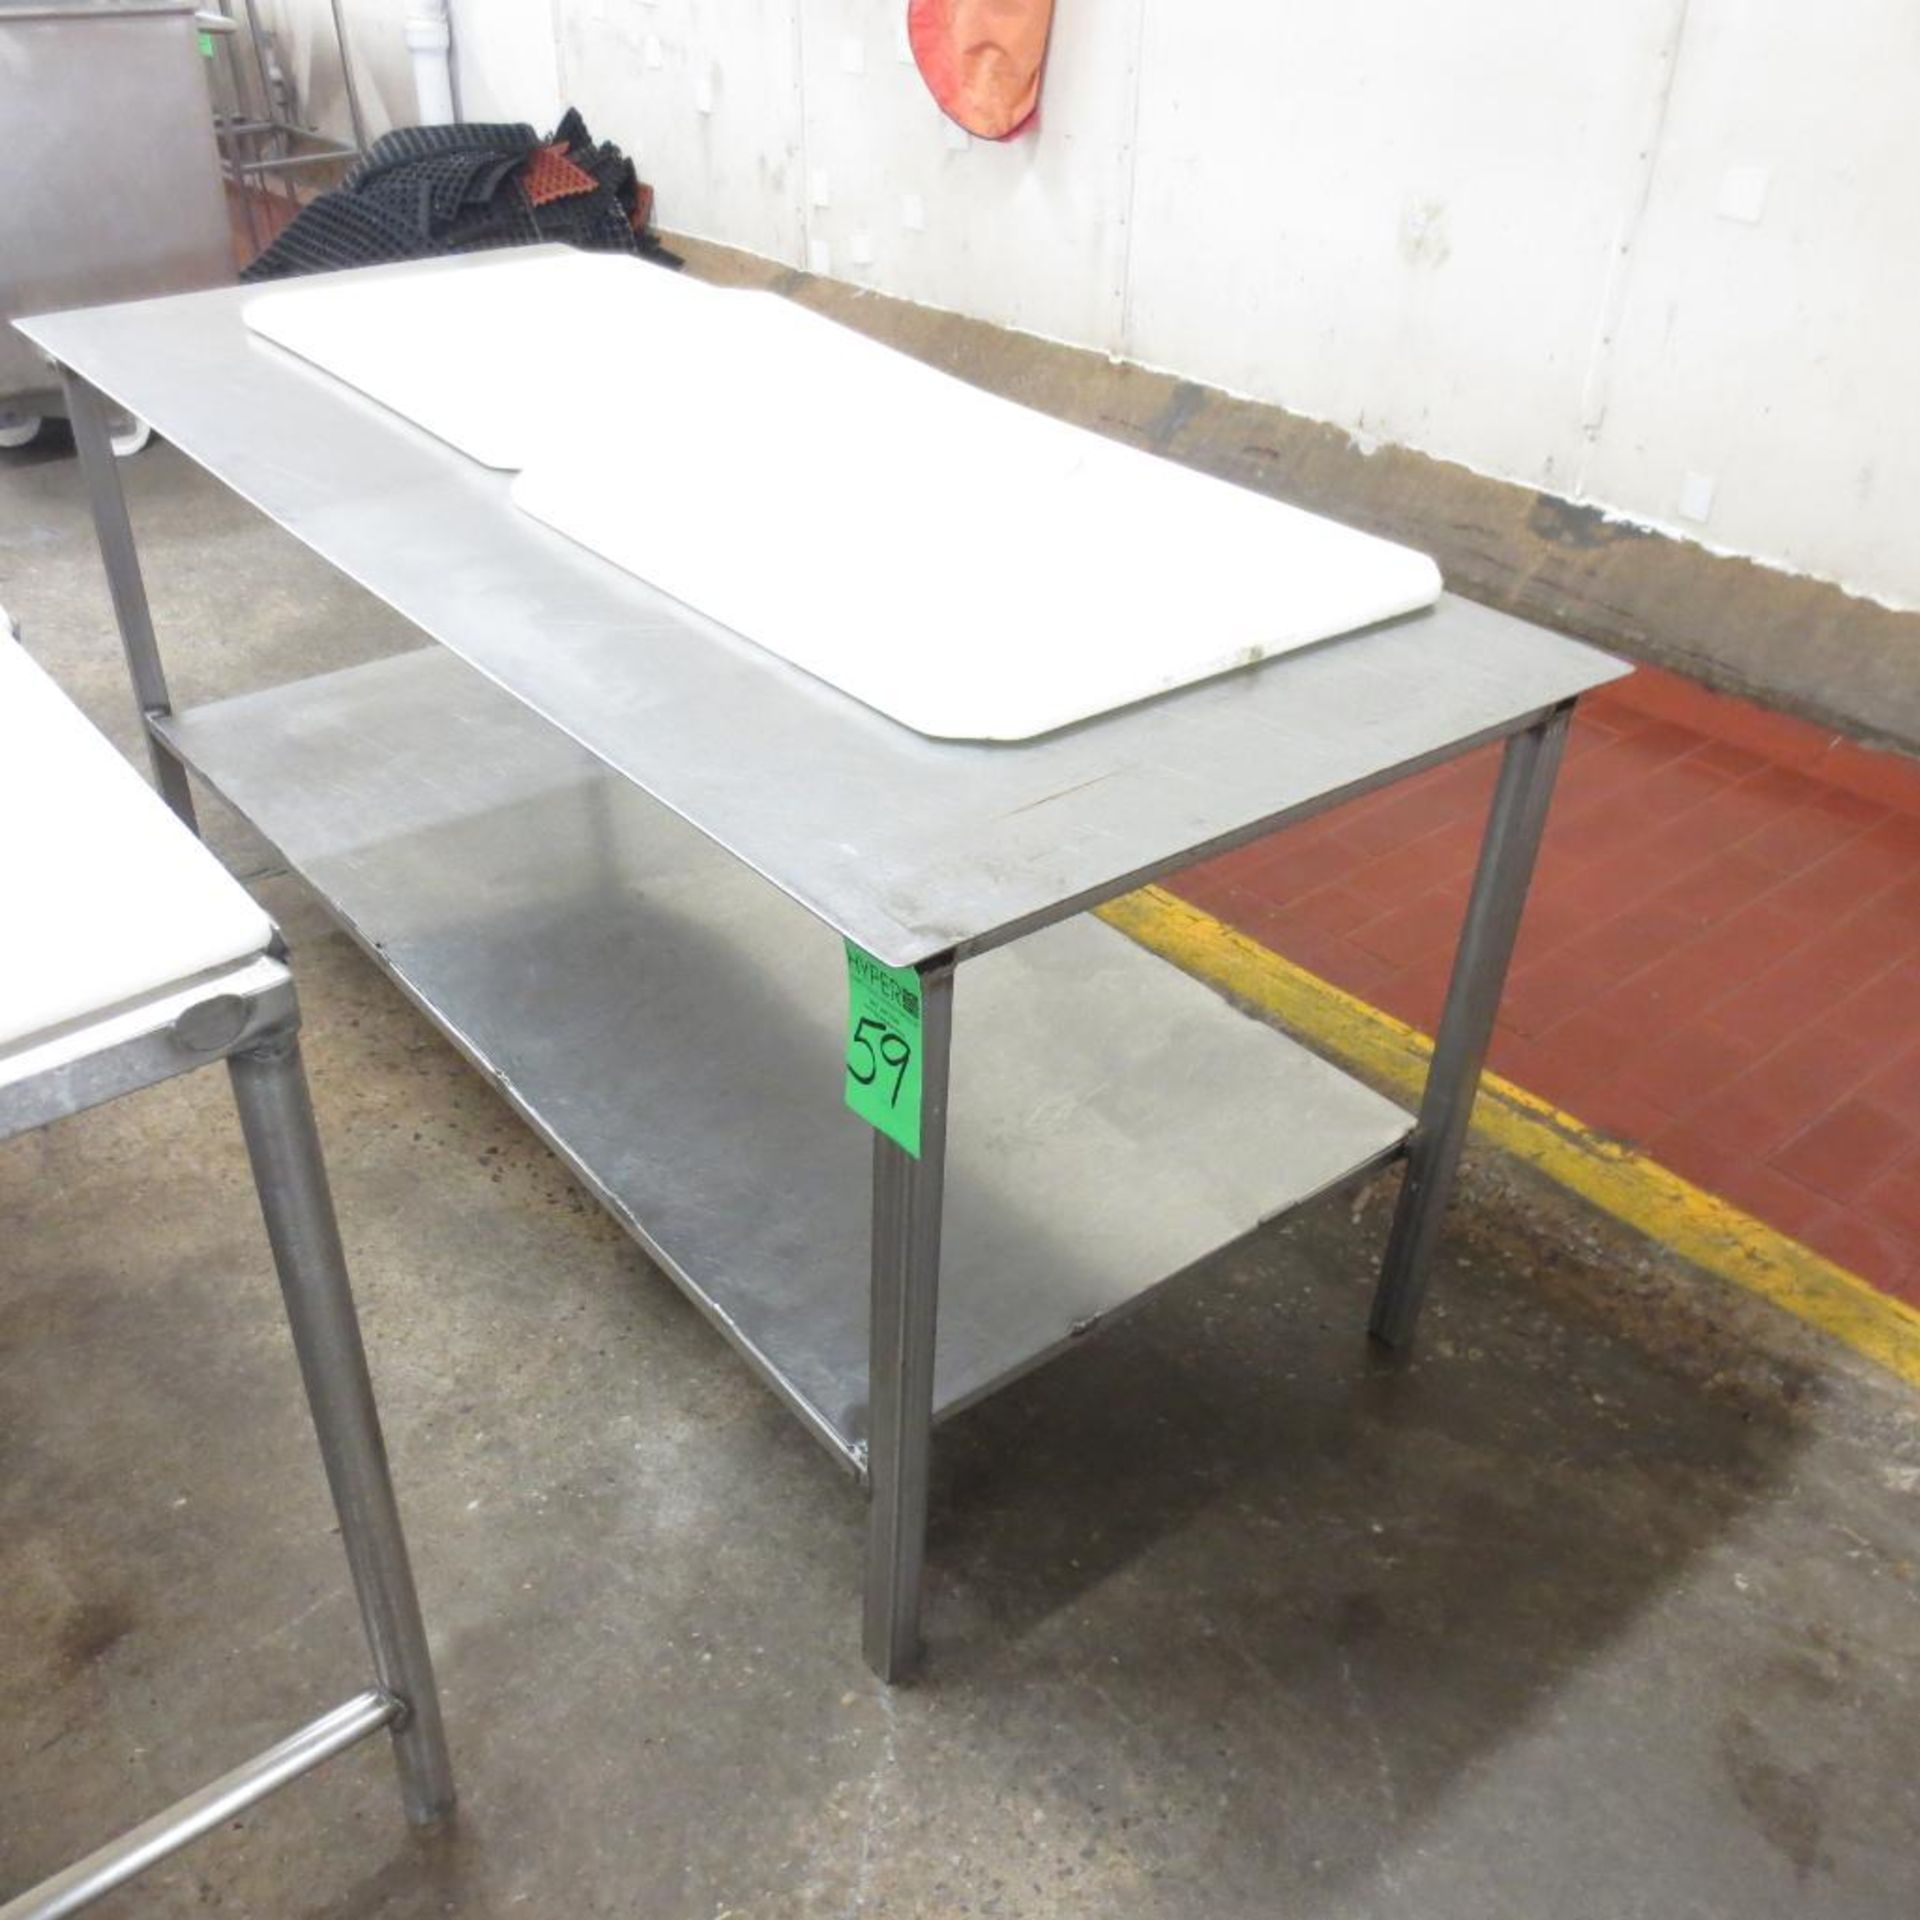 74" X 34 1/2" Stainless Table with (3) Cutting Board Tops